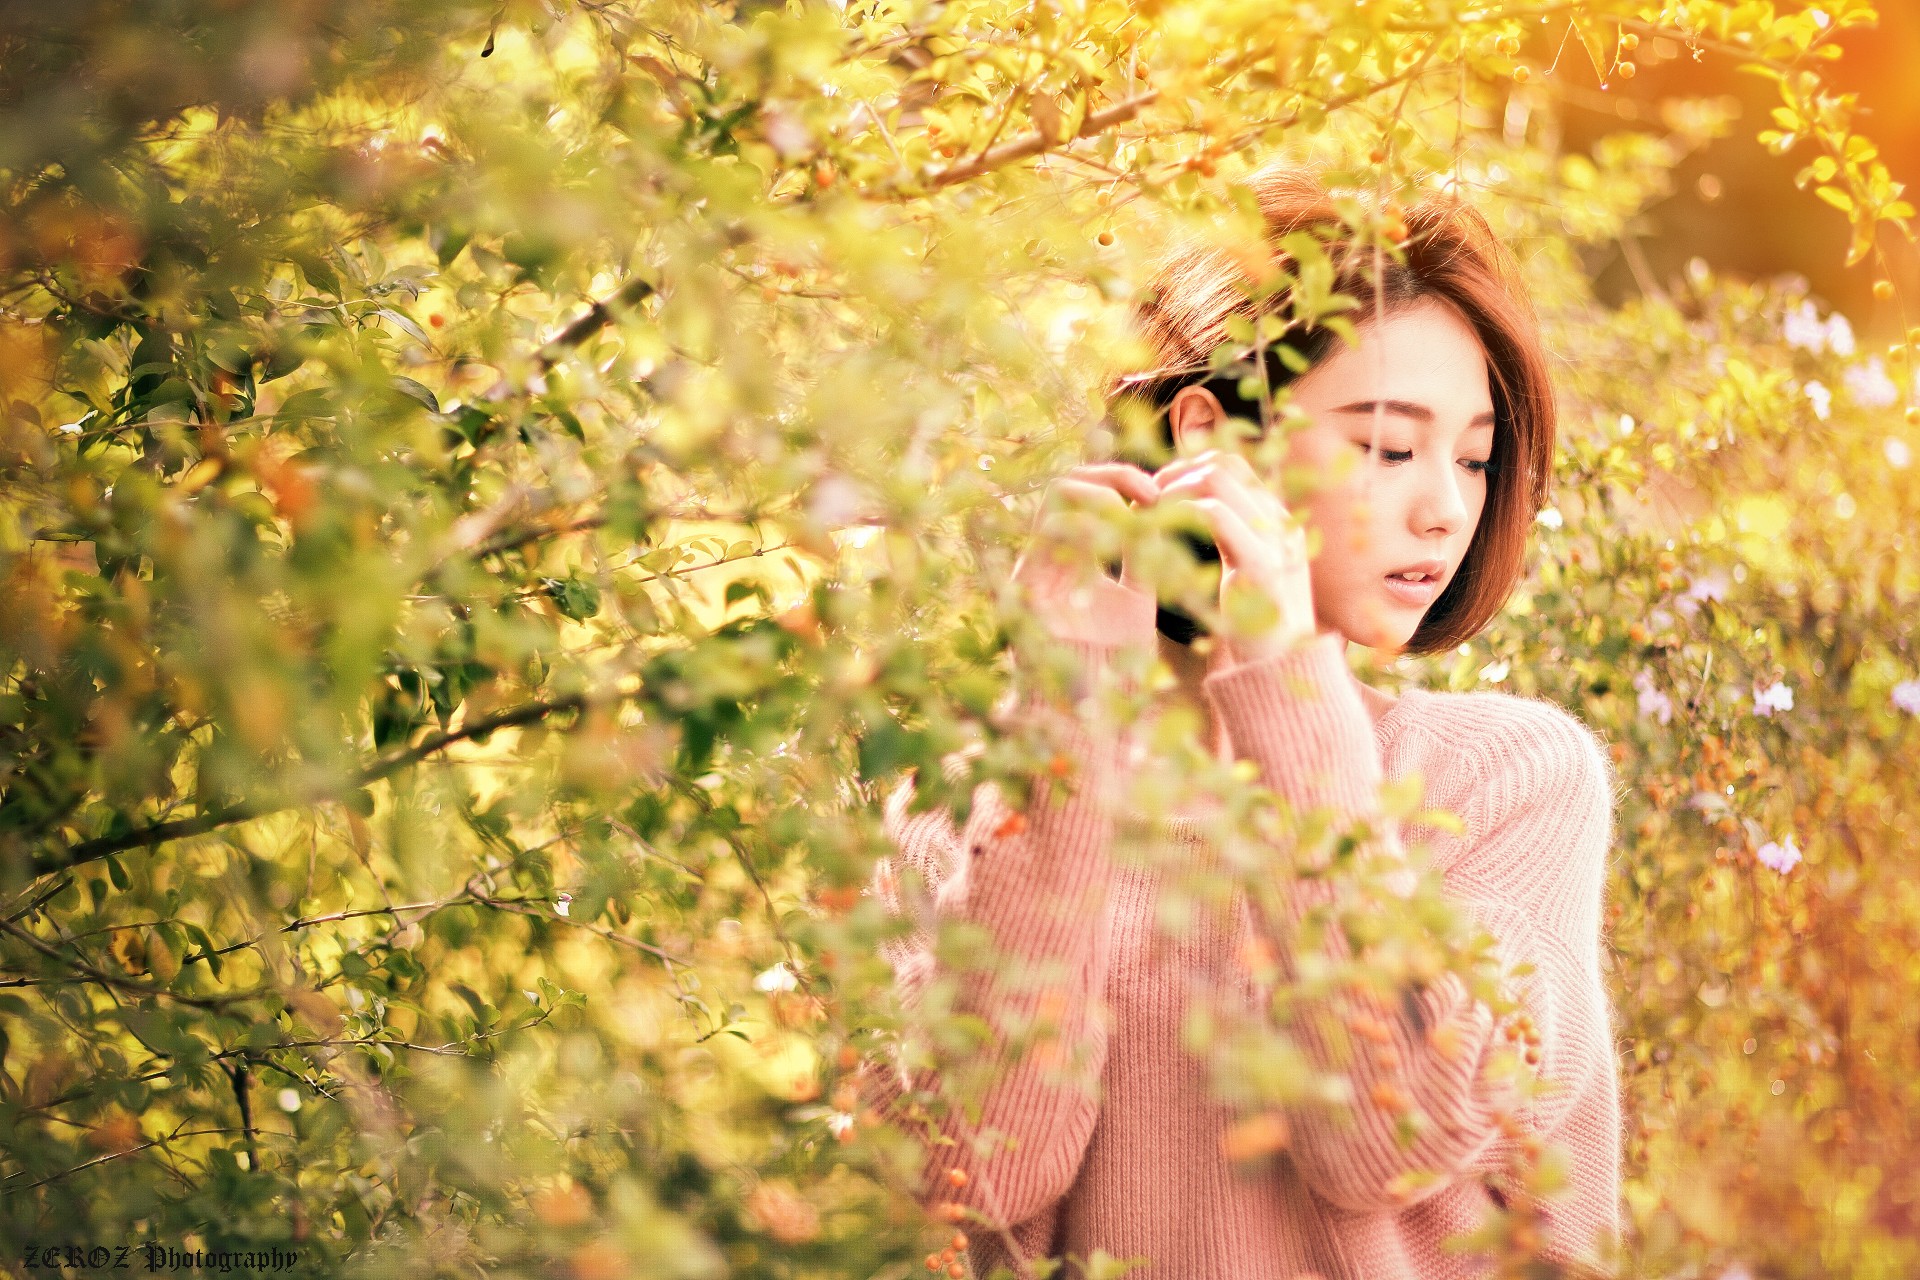 People 1920x1280 women model brunette long hair Asian nature trees women outdoors open mouth sweater leaves depth of field outdoors looking away pink sweater pink clothing plants